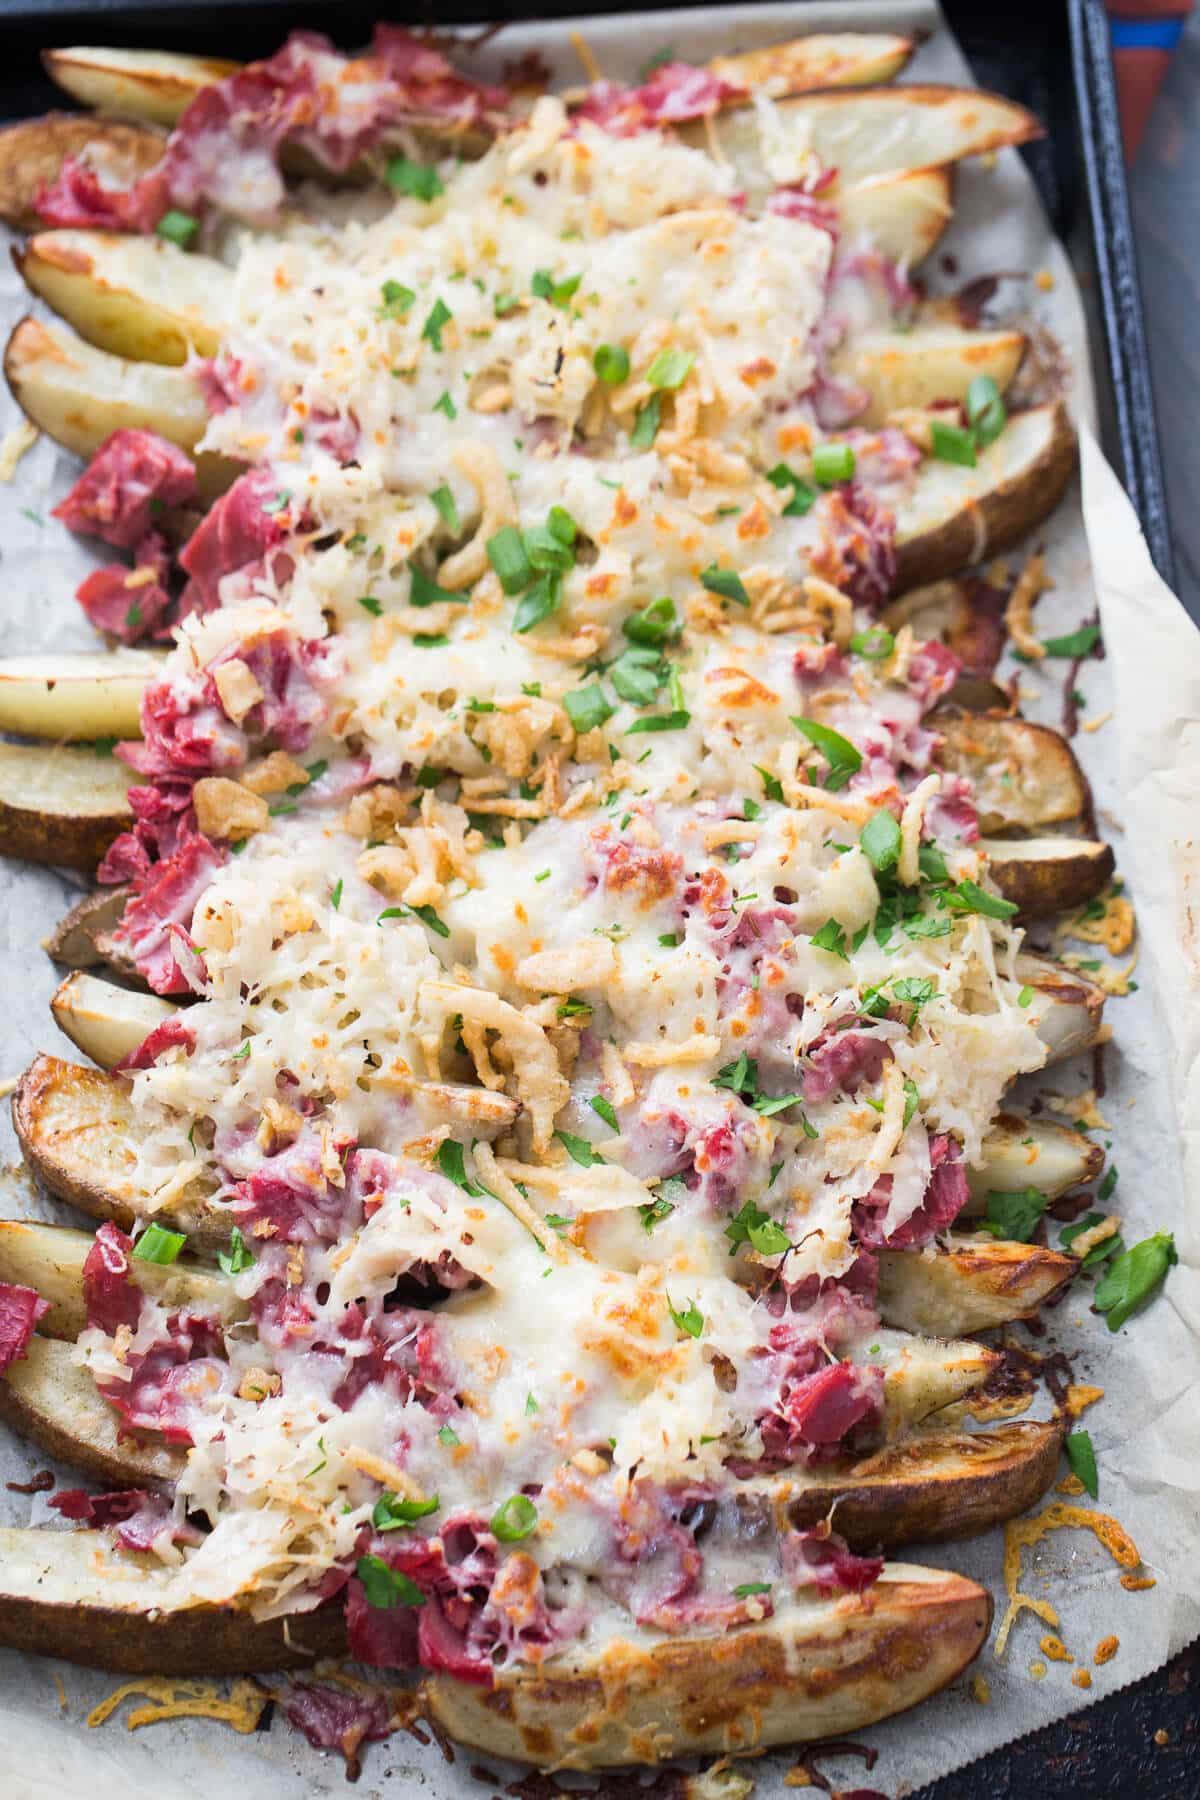 Loaded potatoes recipe-reuben style! You are going to love the toppings on this simple recipe!